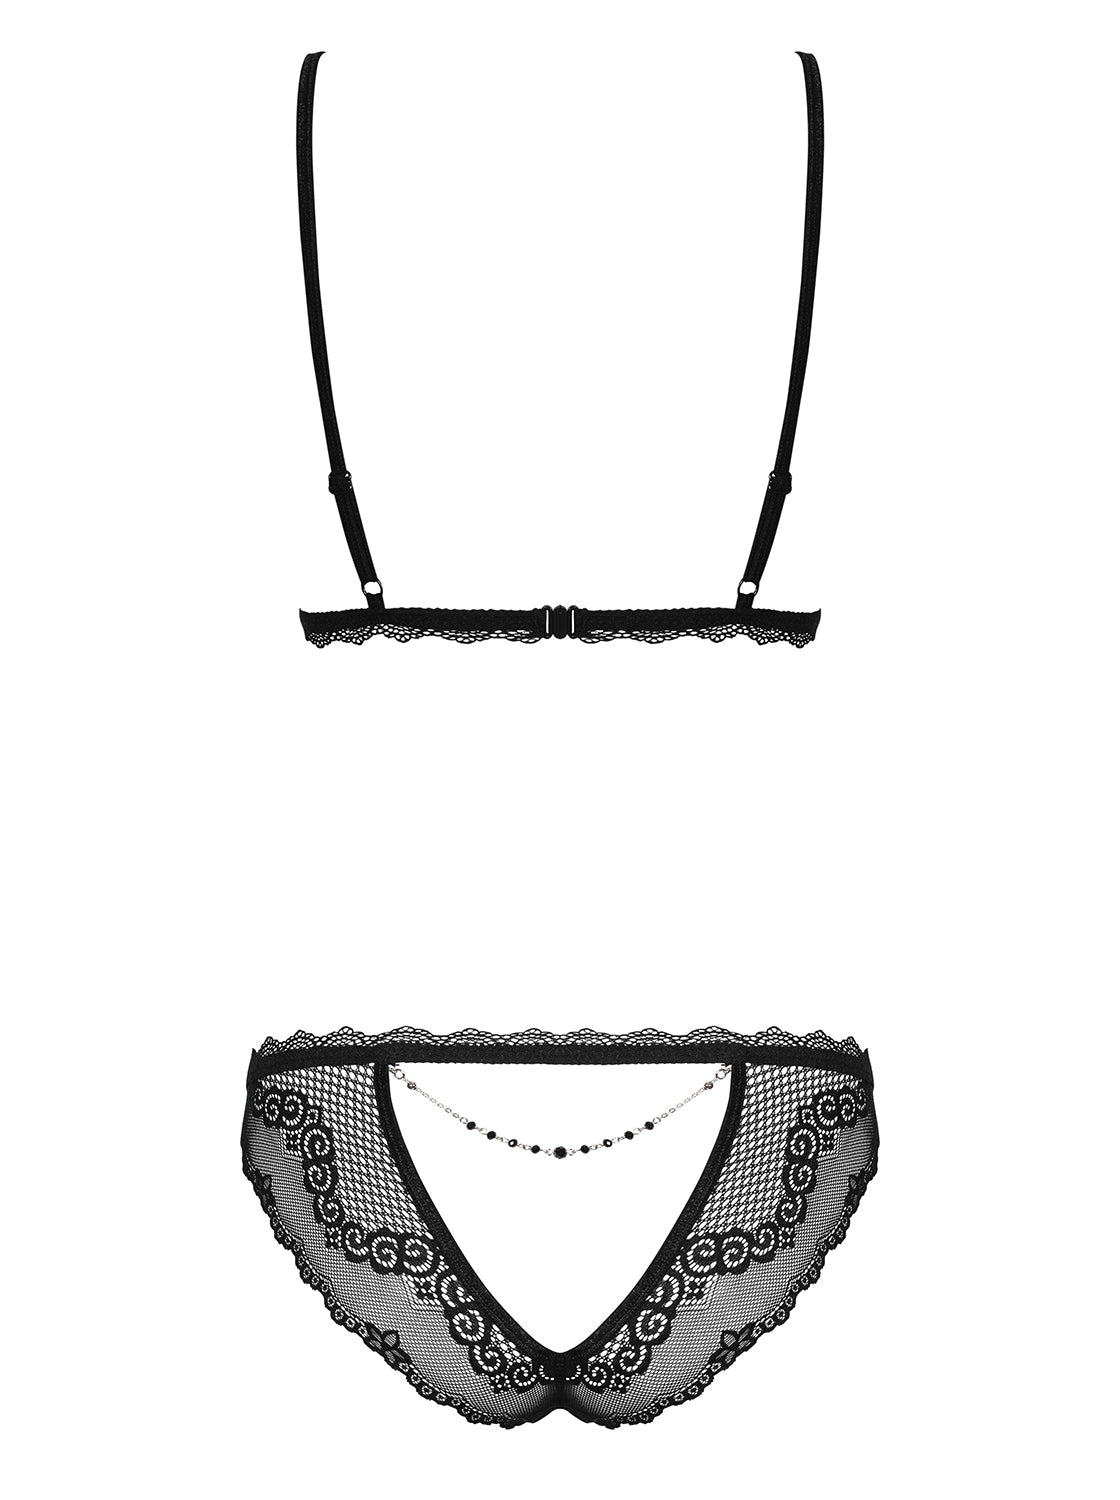 Millagro a charming, black bra and thong made of fine mesh material with seductive cutouts